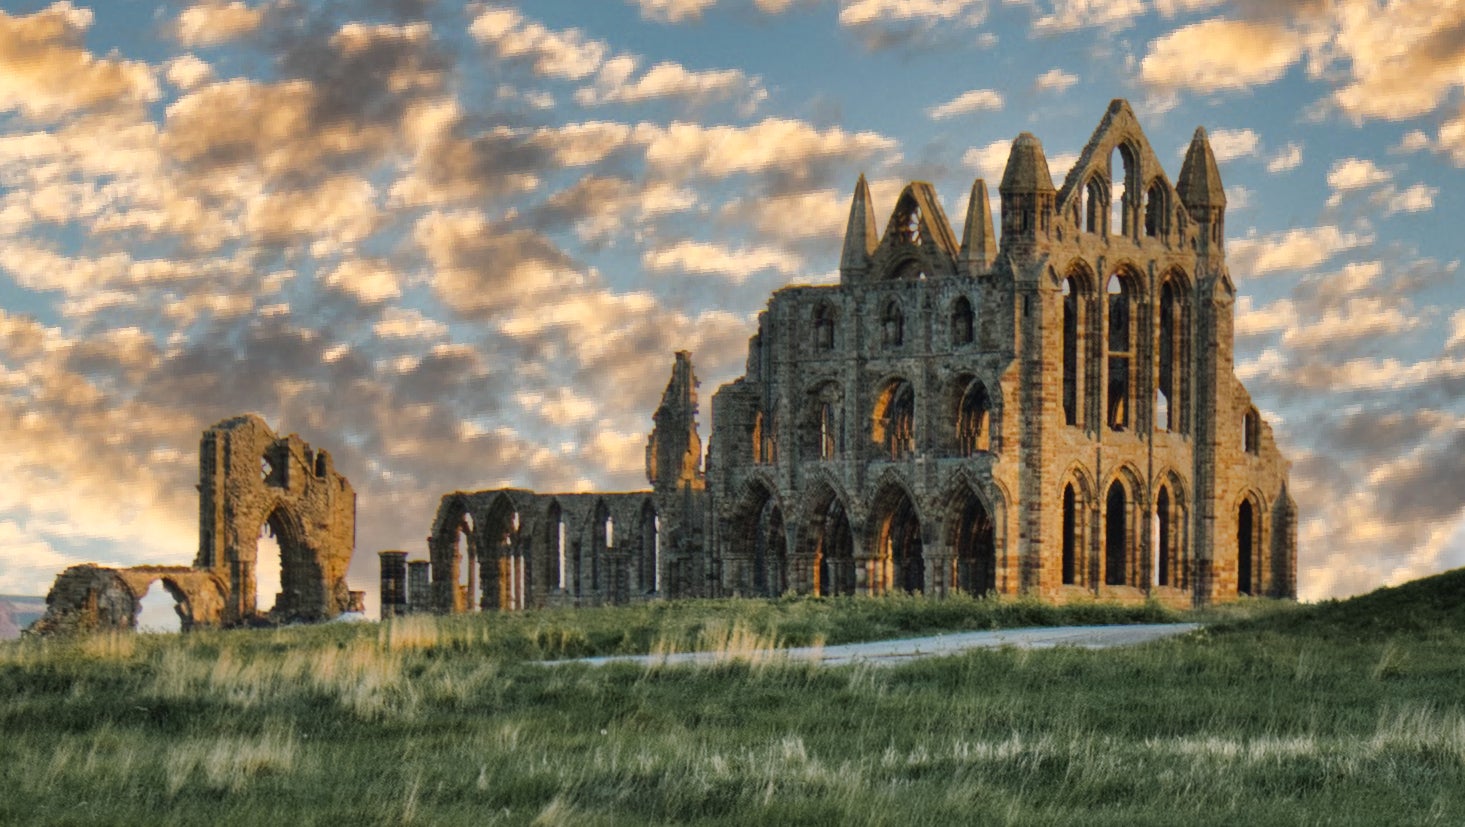 Whitby Abbey, which inspired Bram Stoker’s Dracula